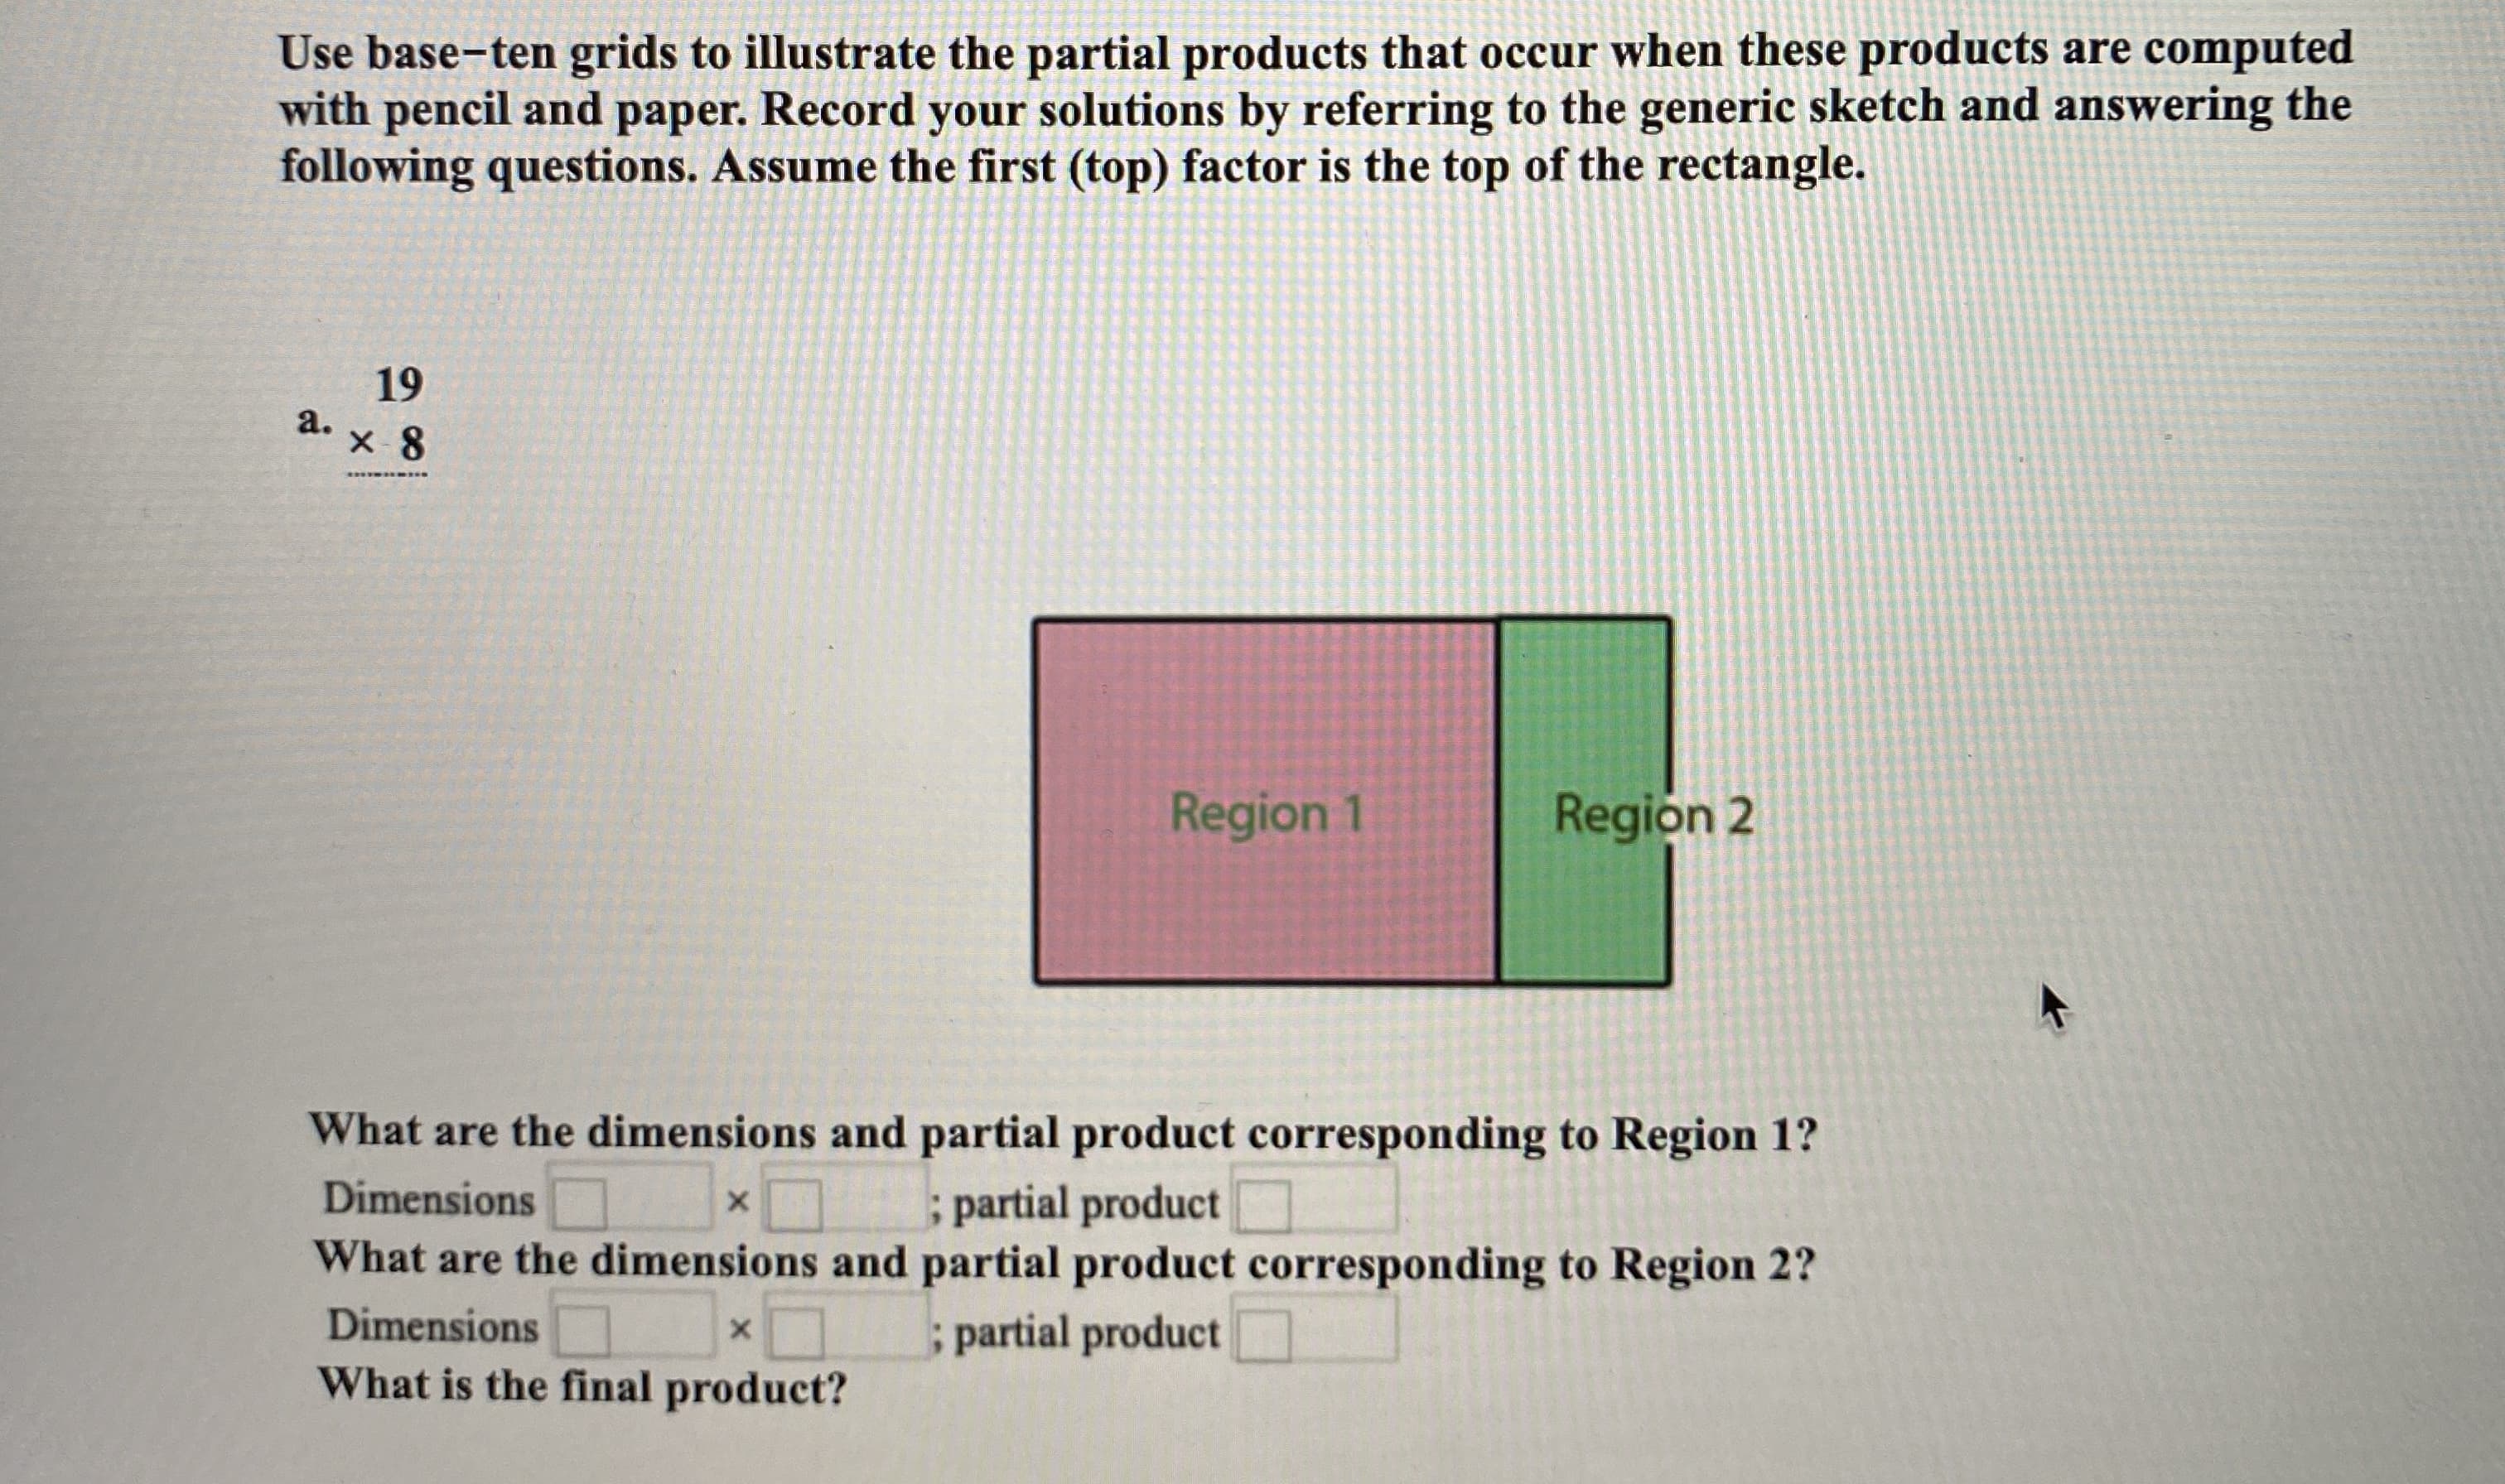 Use base-ten grids to illustrate the partial products that occur when these products are computed
with pencil and paper. Record your solutions by referring to the generic sketch and answering the
following questions. Assume the first (top) factor is the top of the rectangle.
19
a.
Region 1
Region 2
What are the dimensions and partial product corresponding to Region 1?
; partial product
What are the dimensions and partial product corresponding to Region 2?
; partial product
Dimensions
Dimensions
What is the final product?
2.
